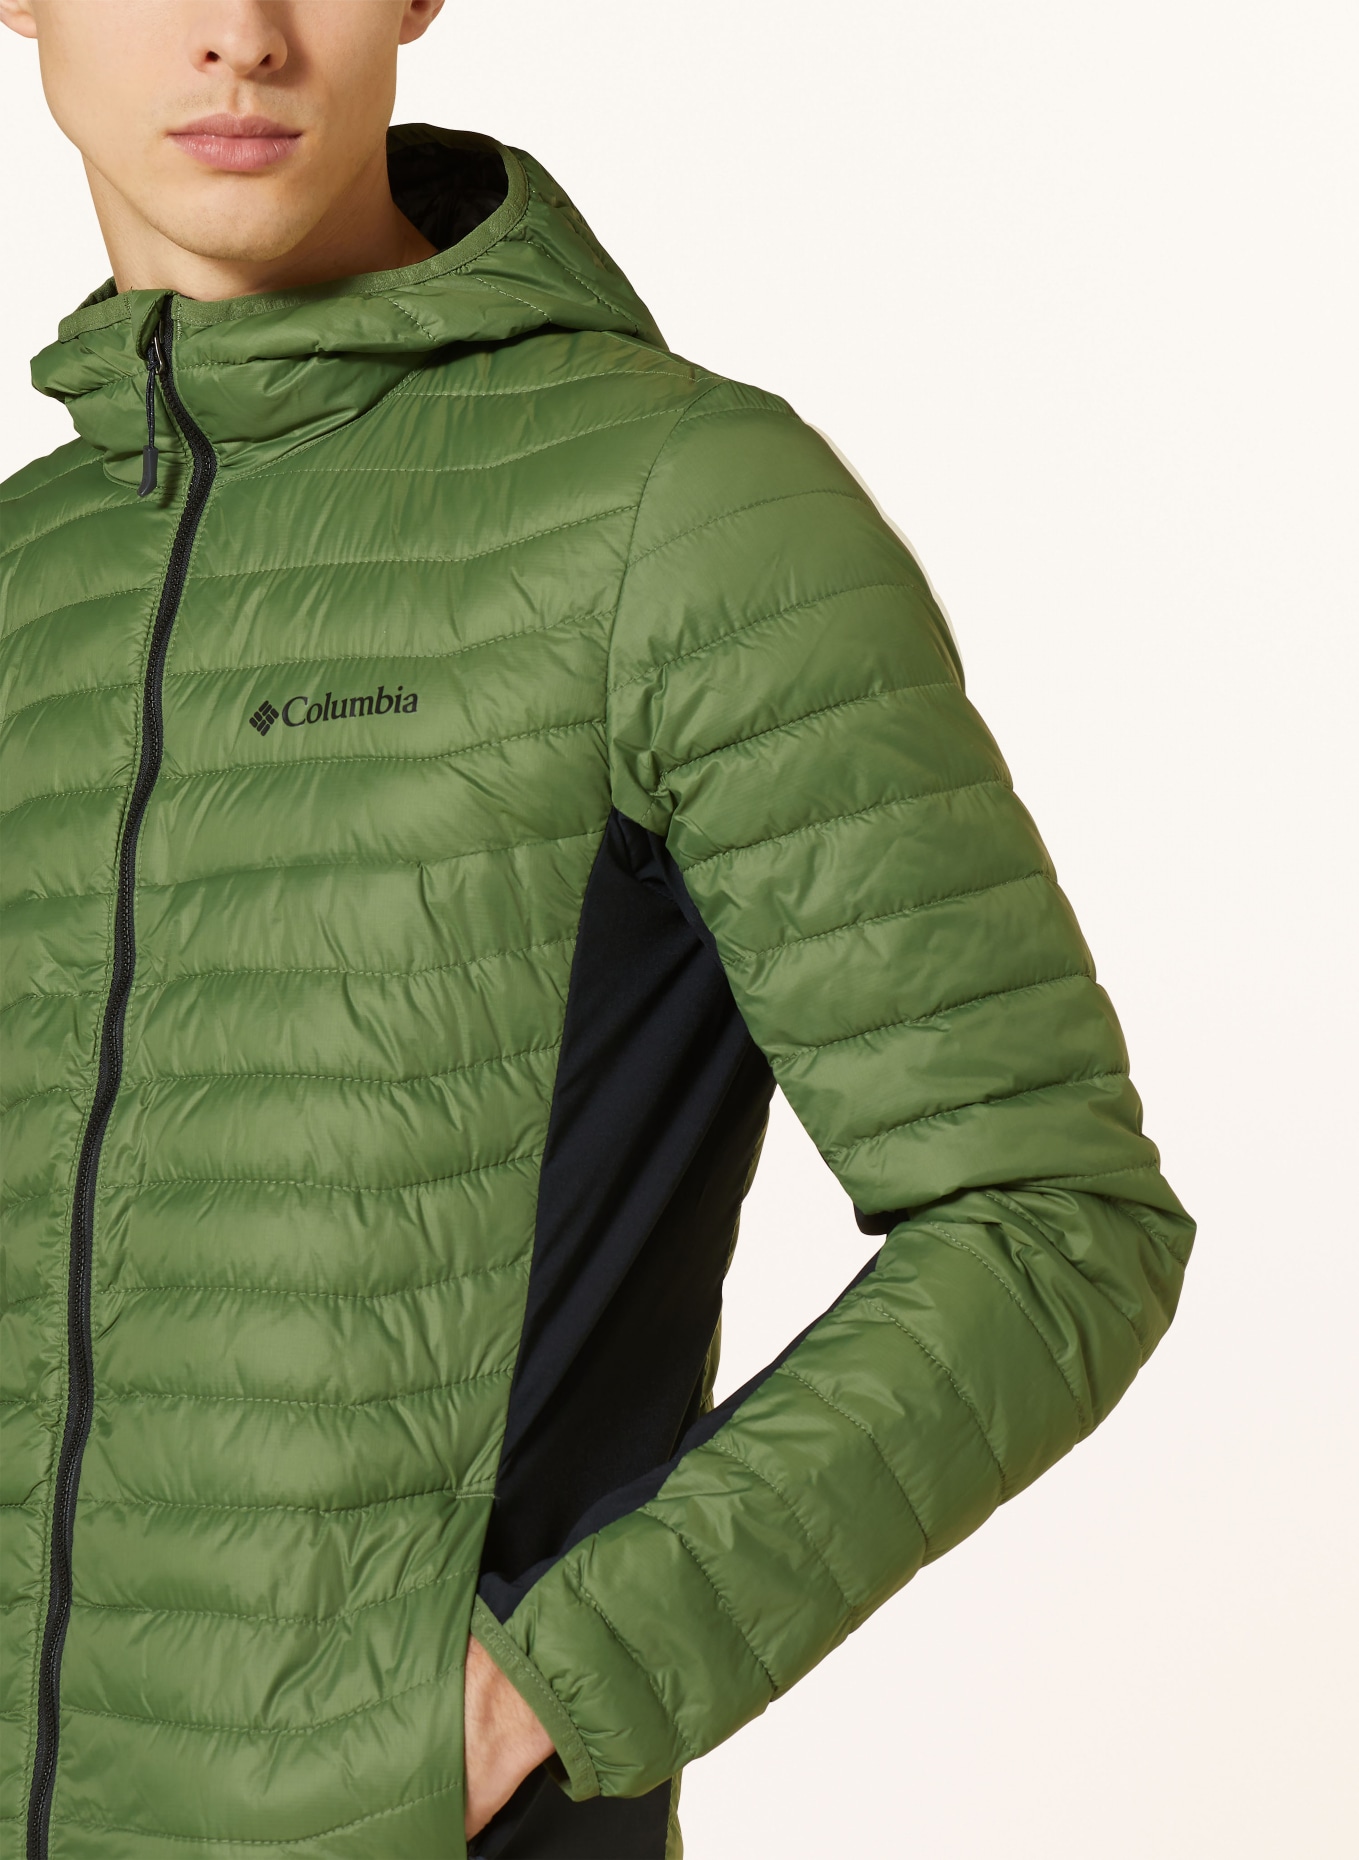 Columbia Hybrid quilted jacket POWDER PASS, Color: 353 Canteen, Black, (Image 5)